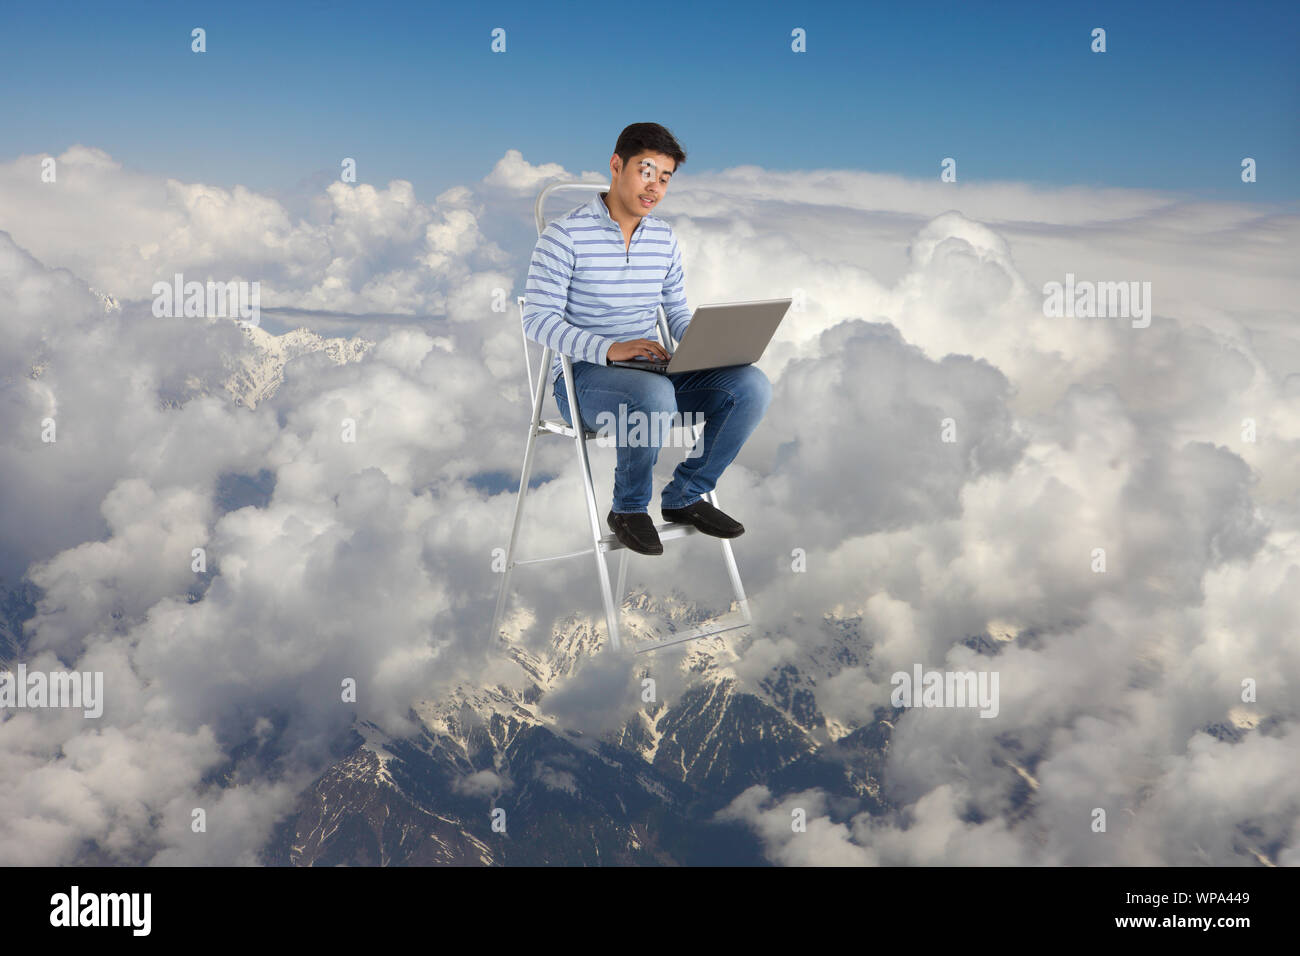 Young man sitting on a step ladder using a laptop Stock Photo